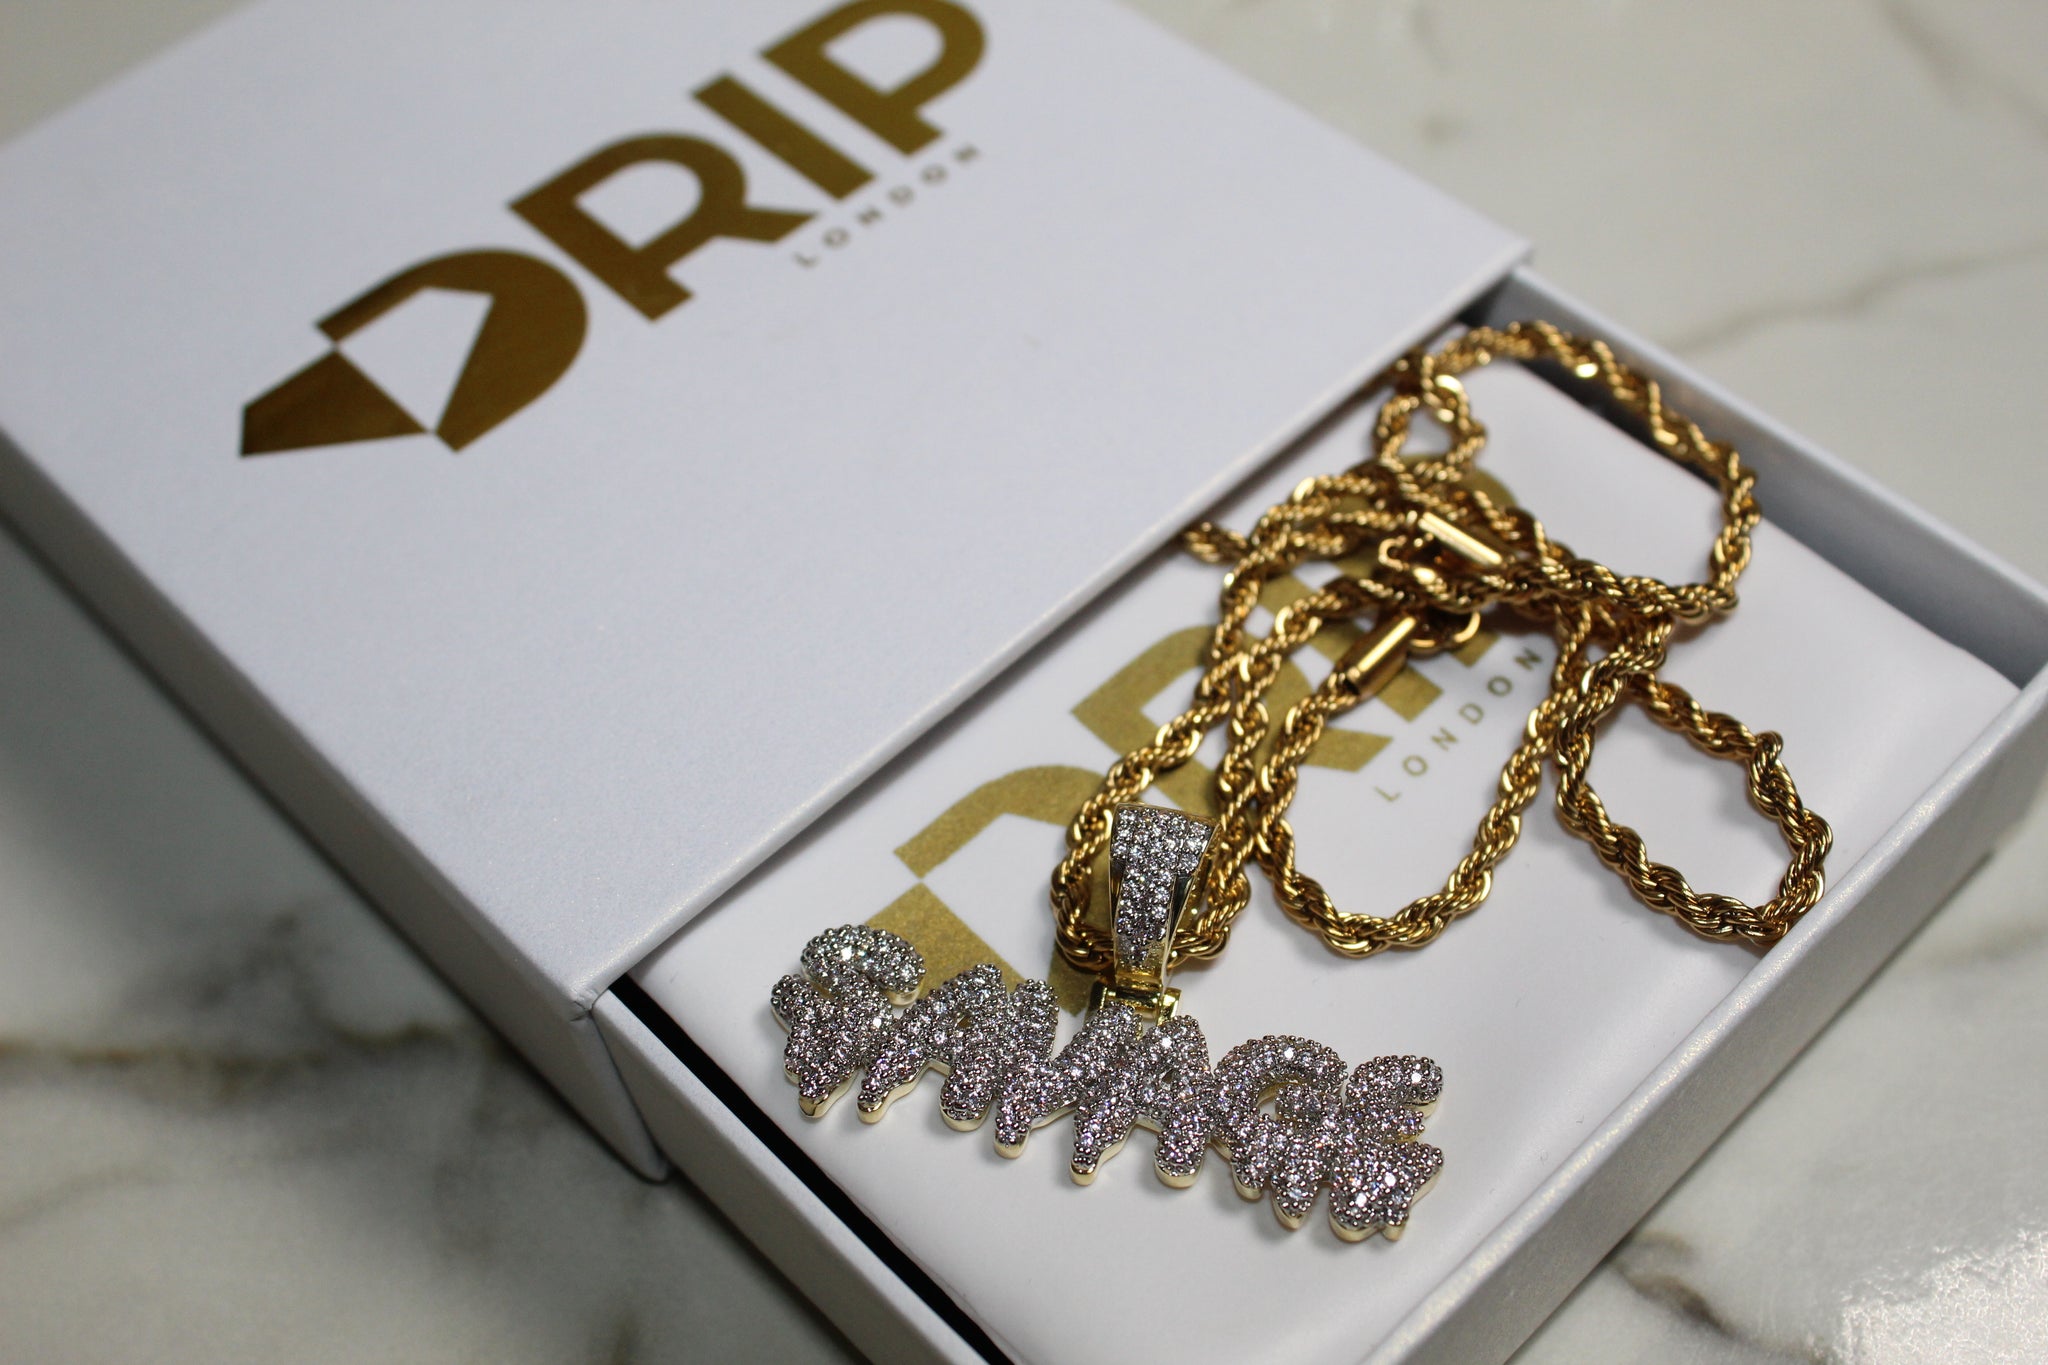 Iced Savage Bling Dripping Letters Pendant Men's Fashion Necklace